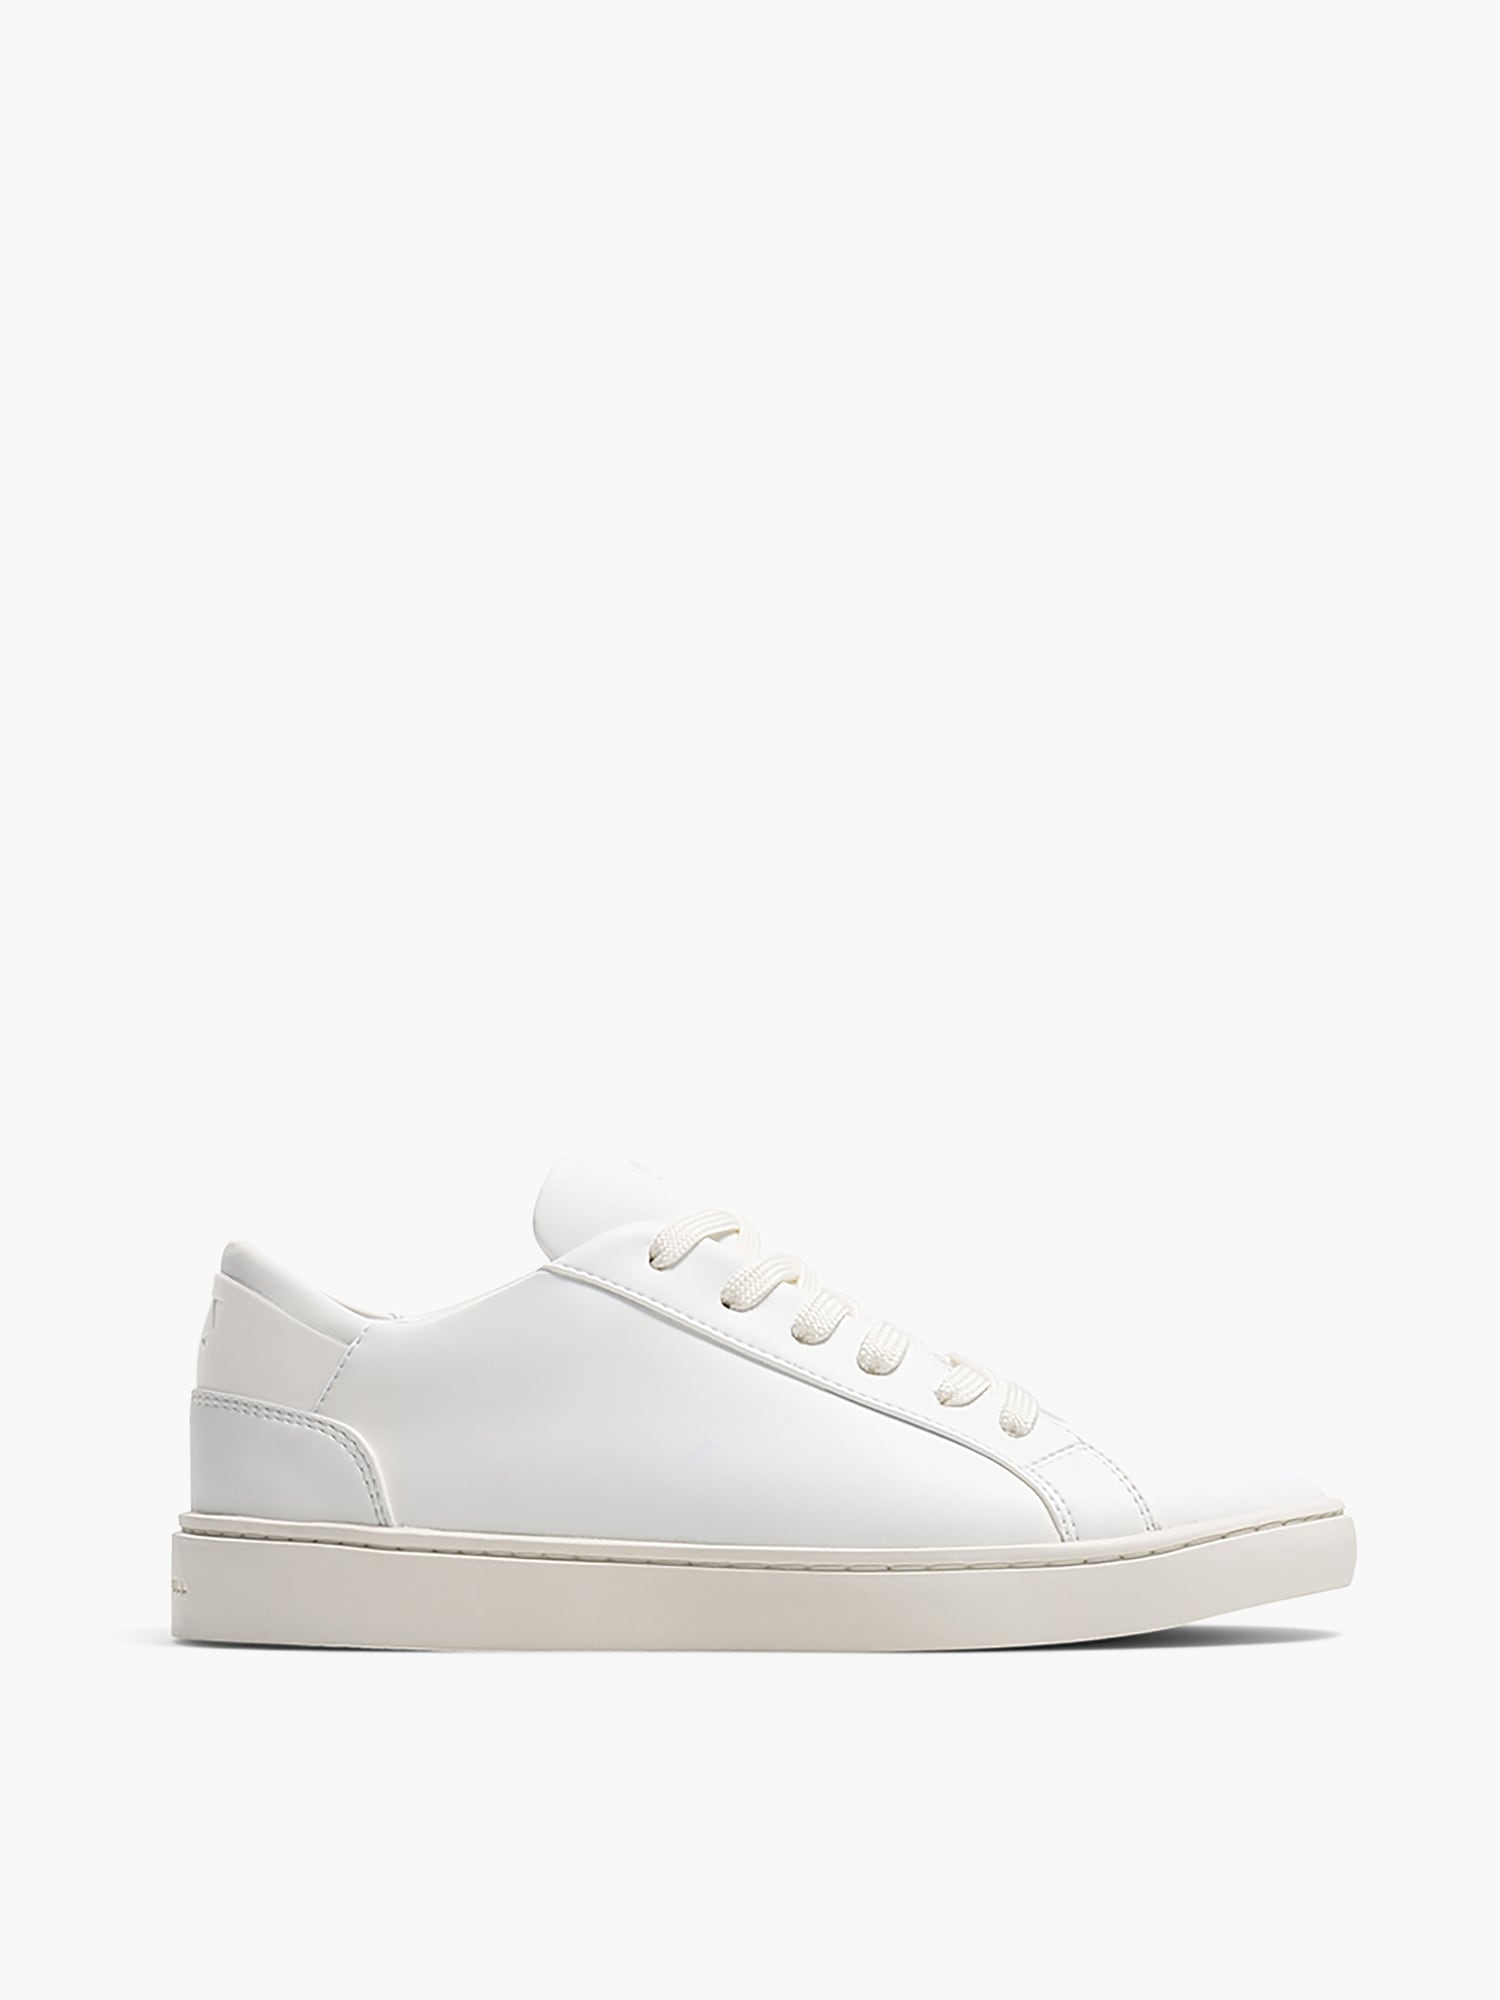 Gap Thousand Fell Womens Lace Up Sneaker